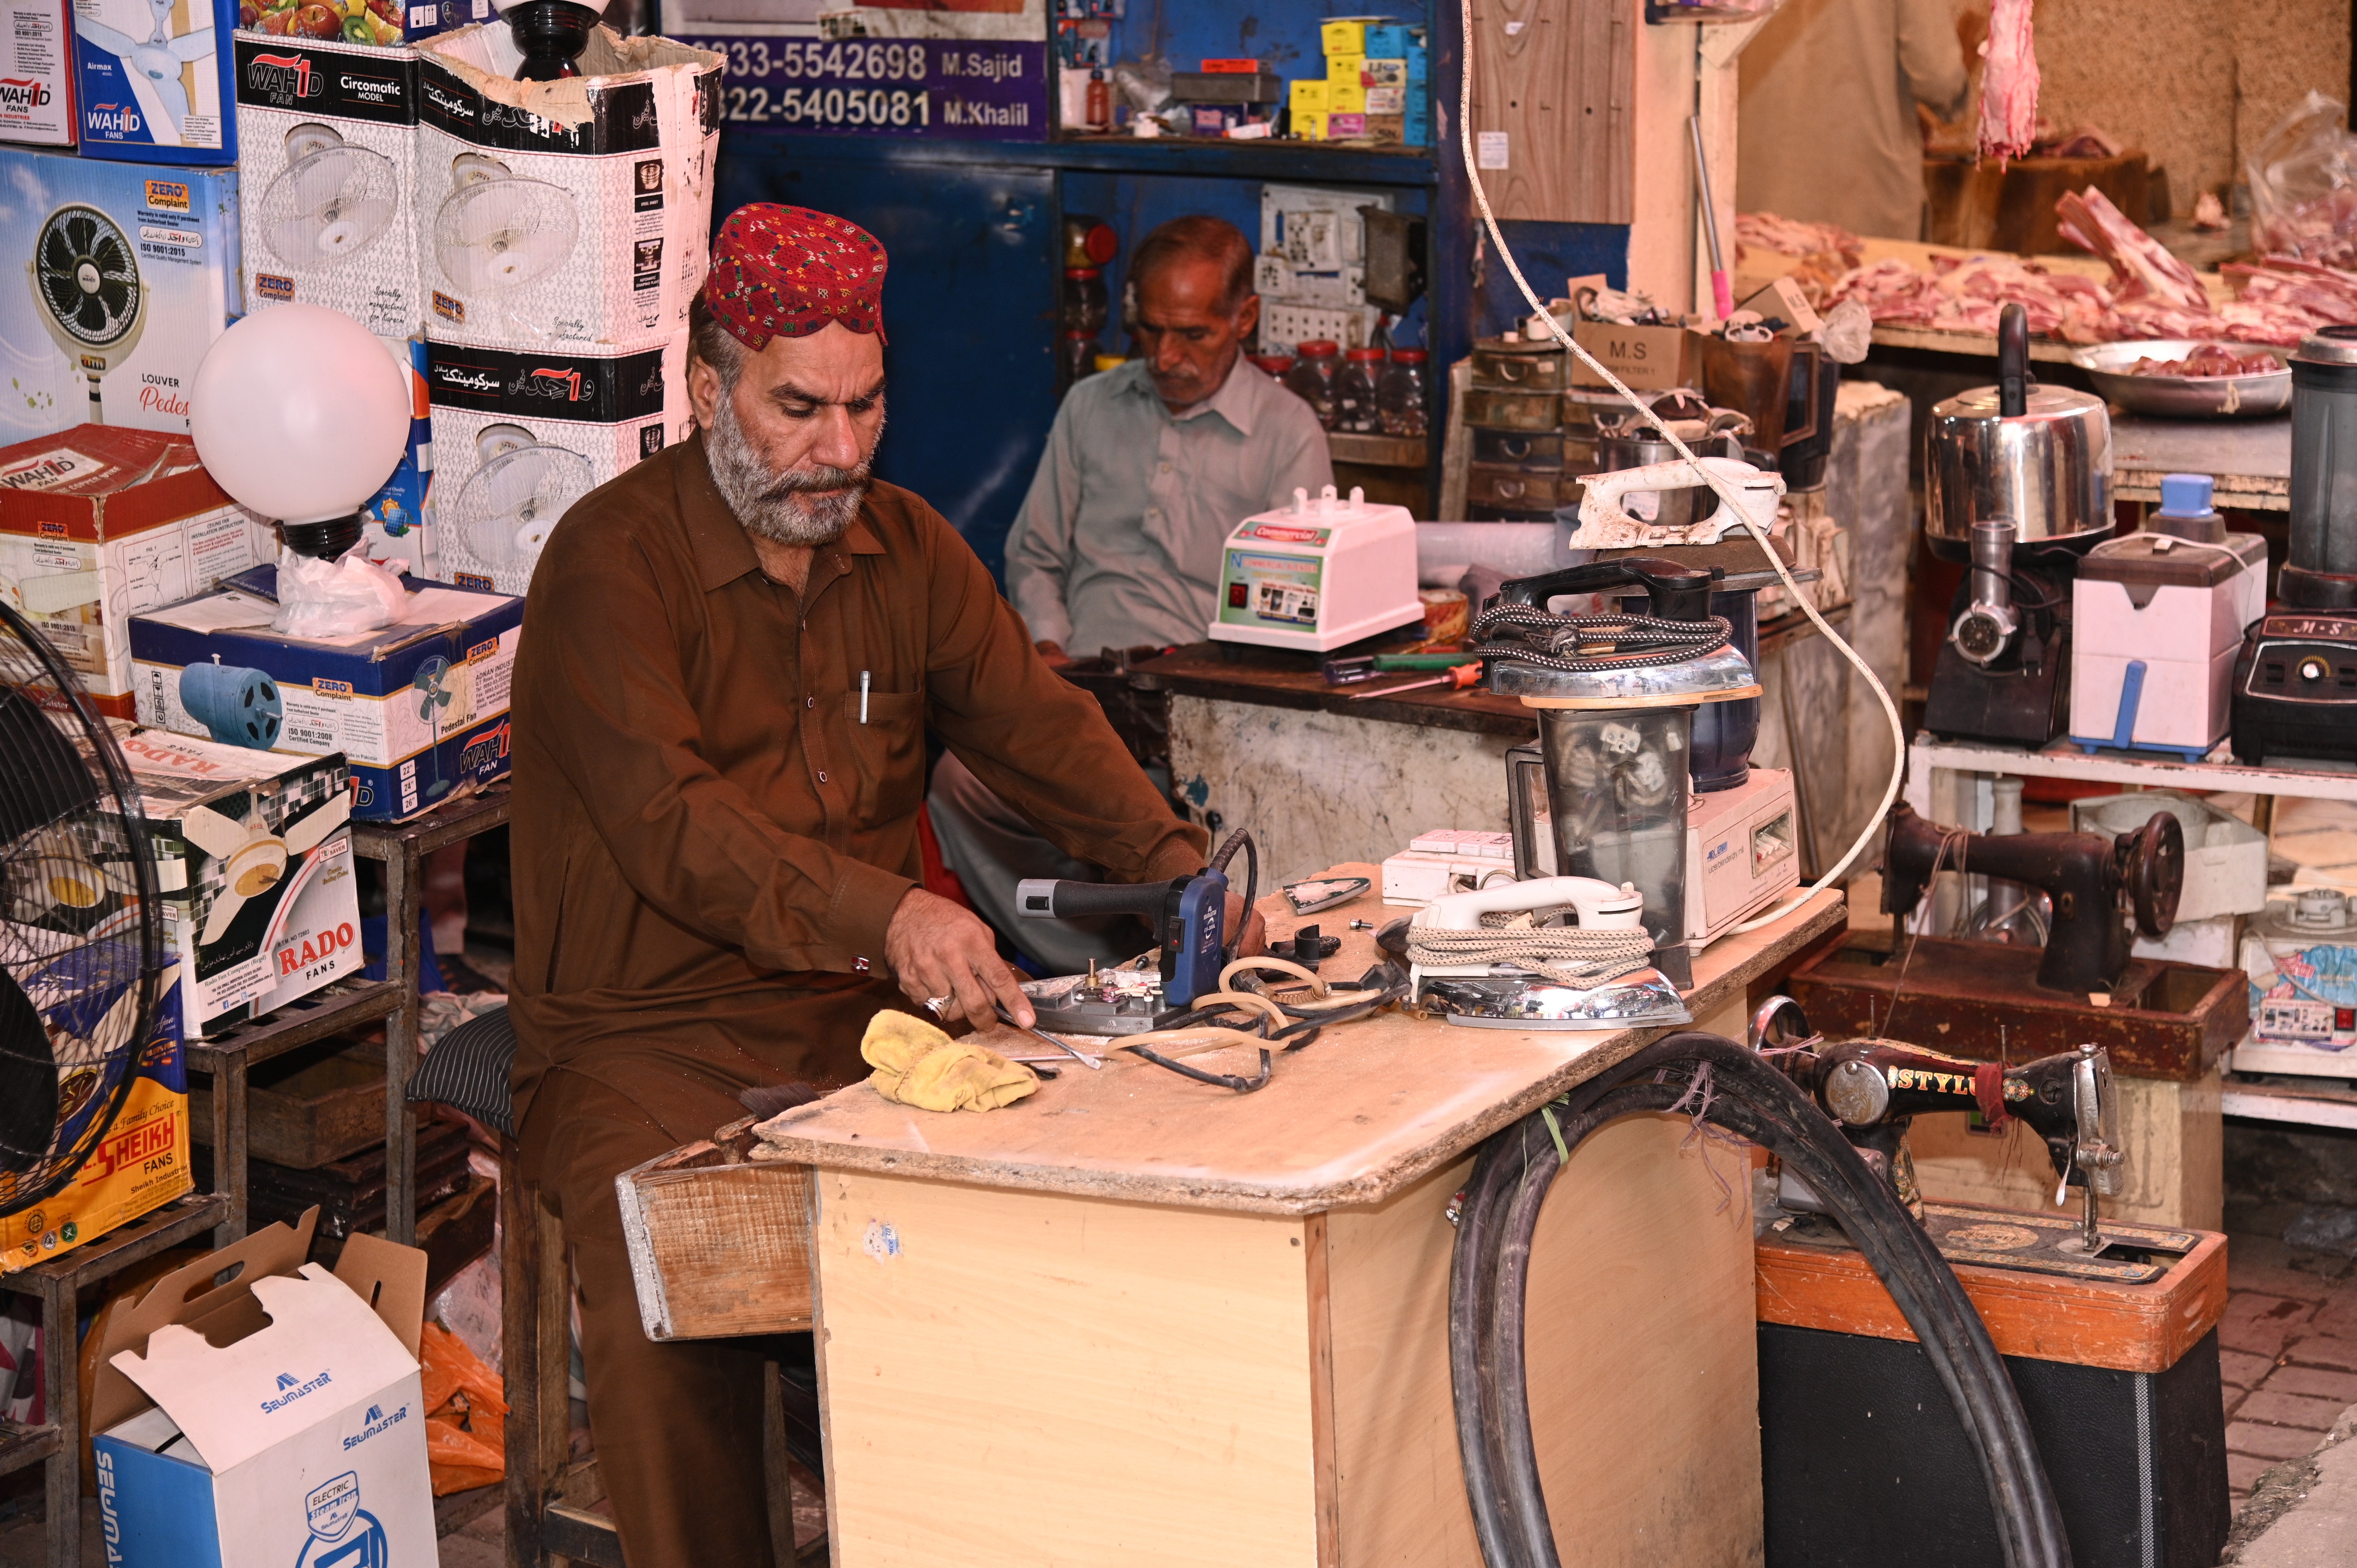 A shopkeeper fixing electrical appliances in Abpara market